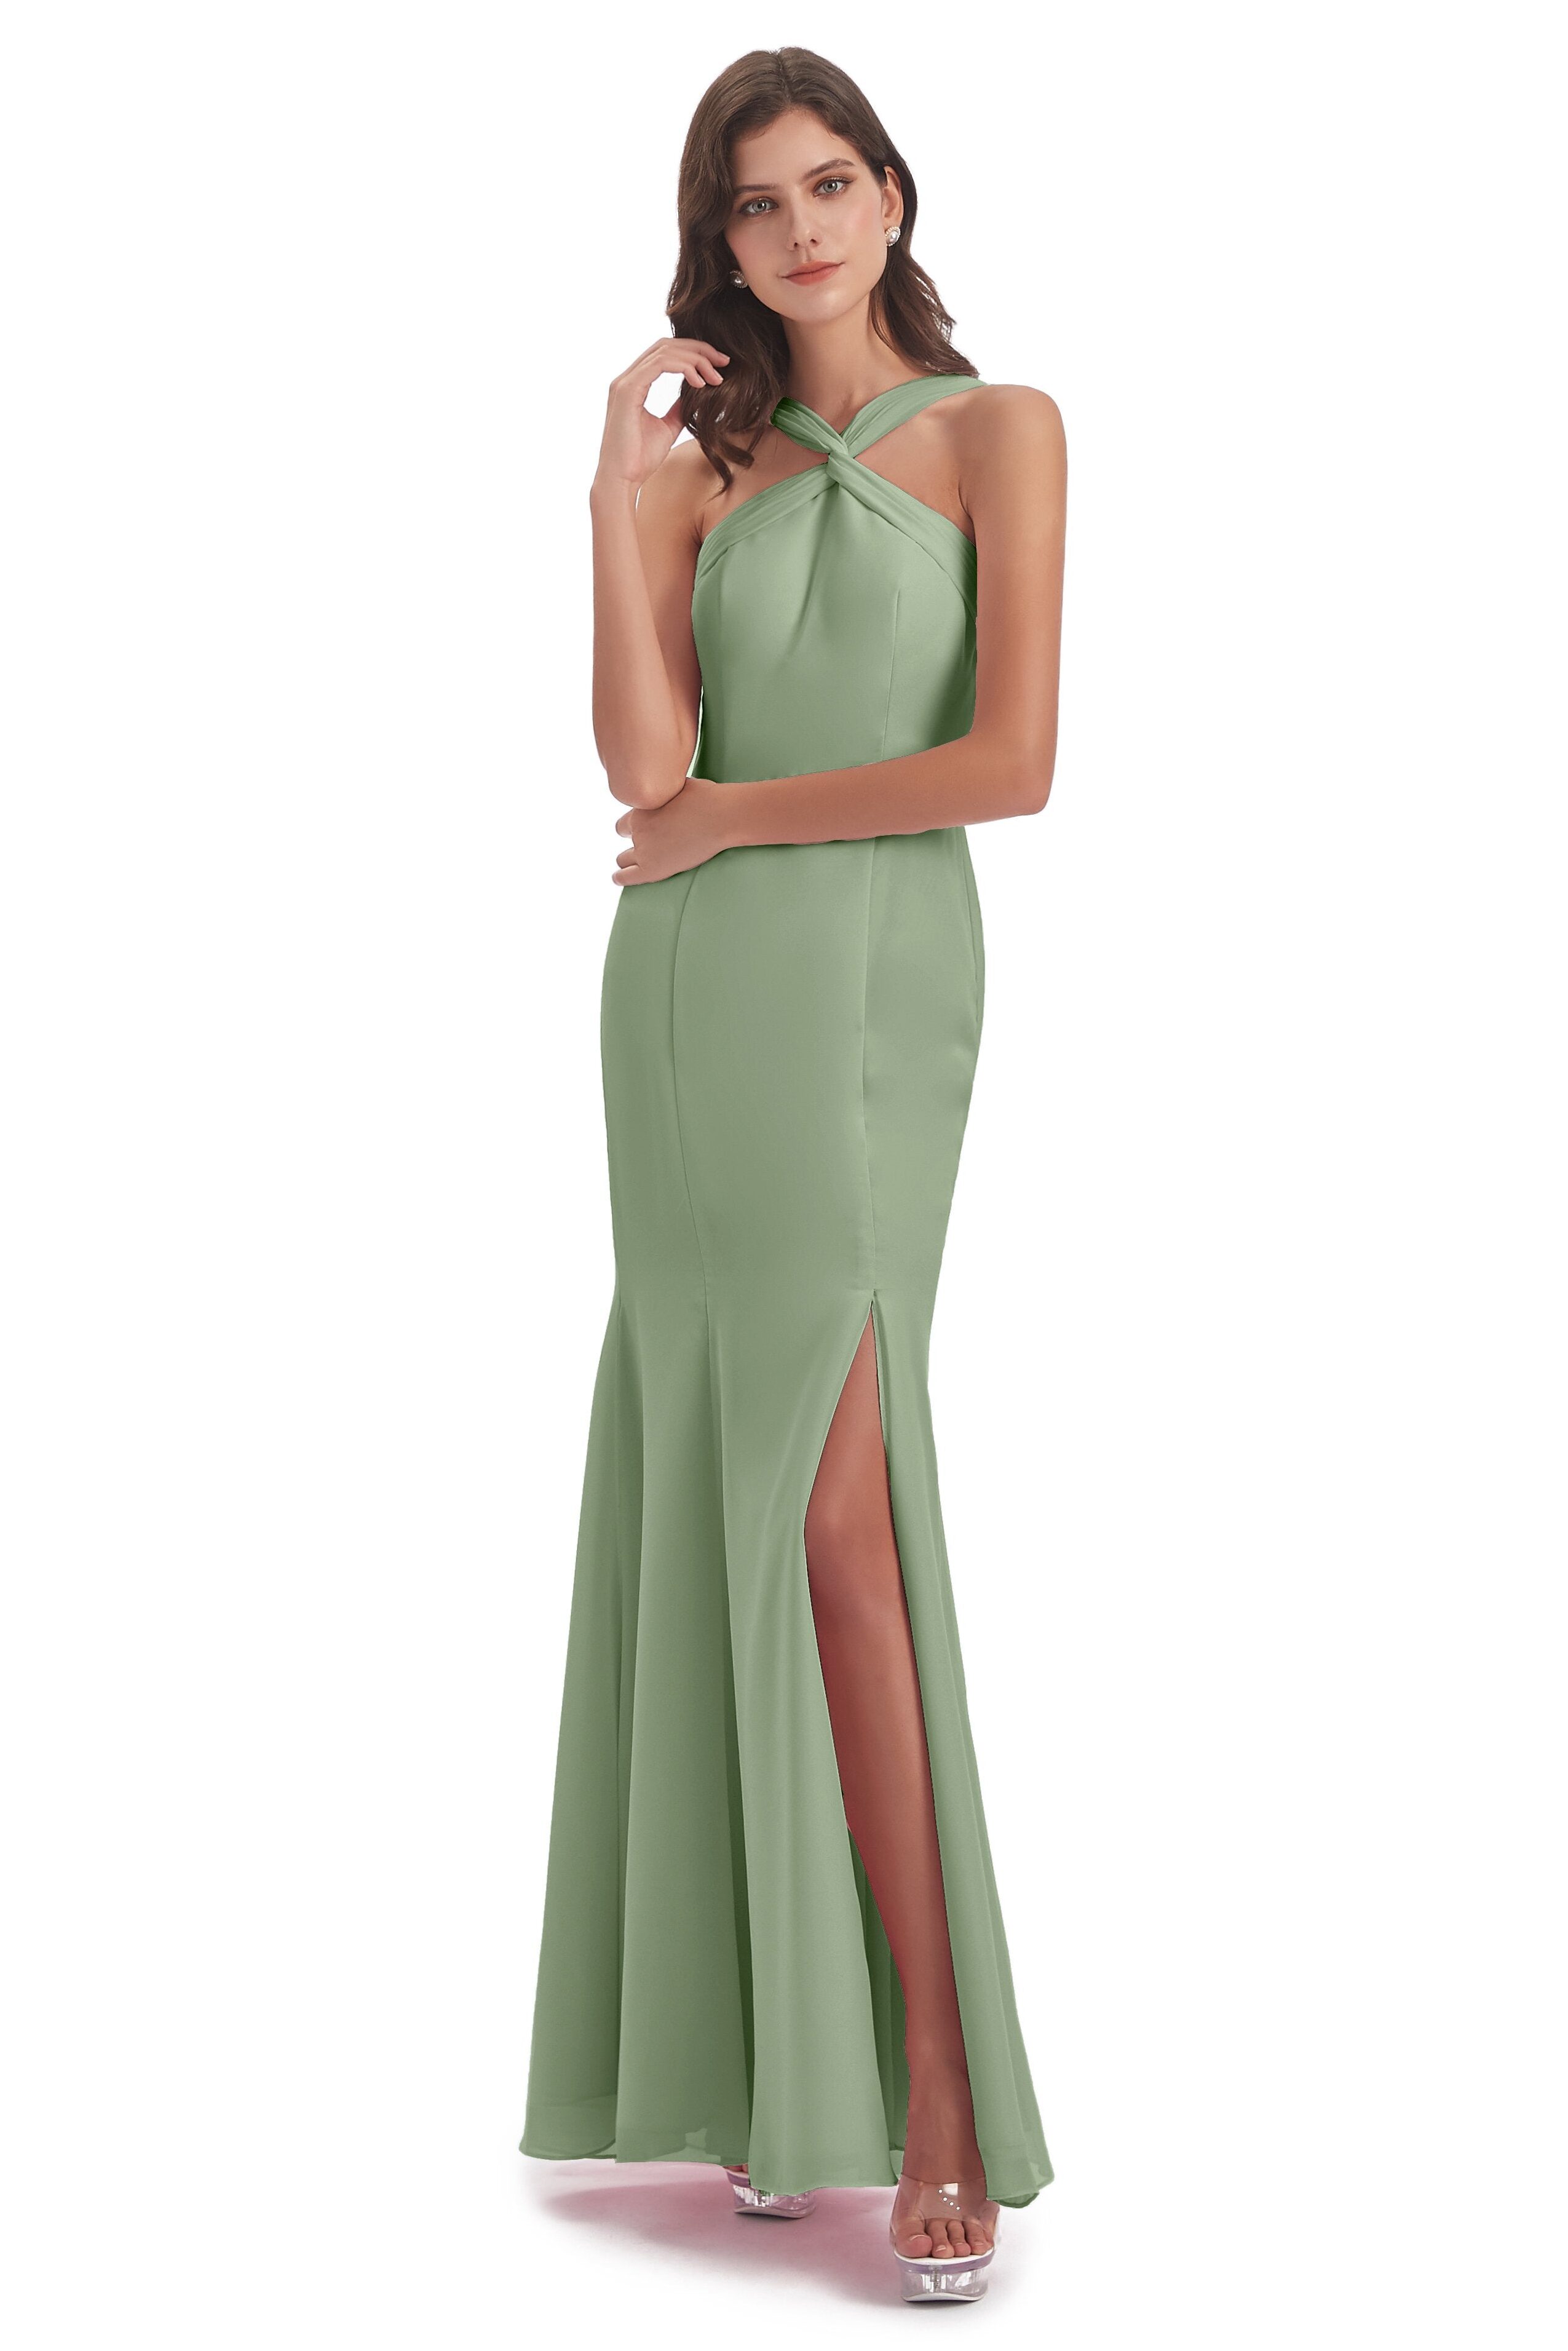 Colors for bridesmaid dresses in 2022 - Sage Green